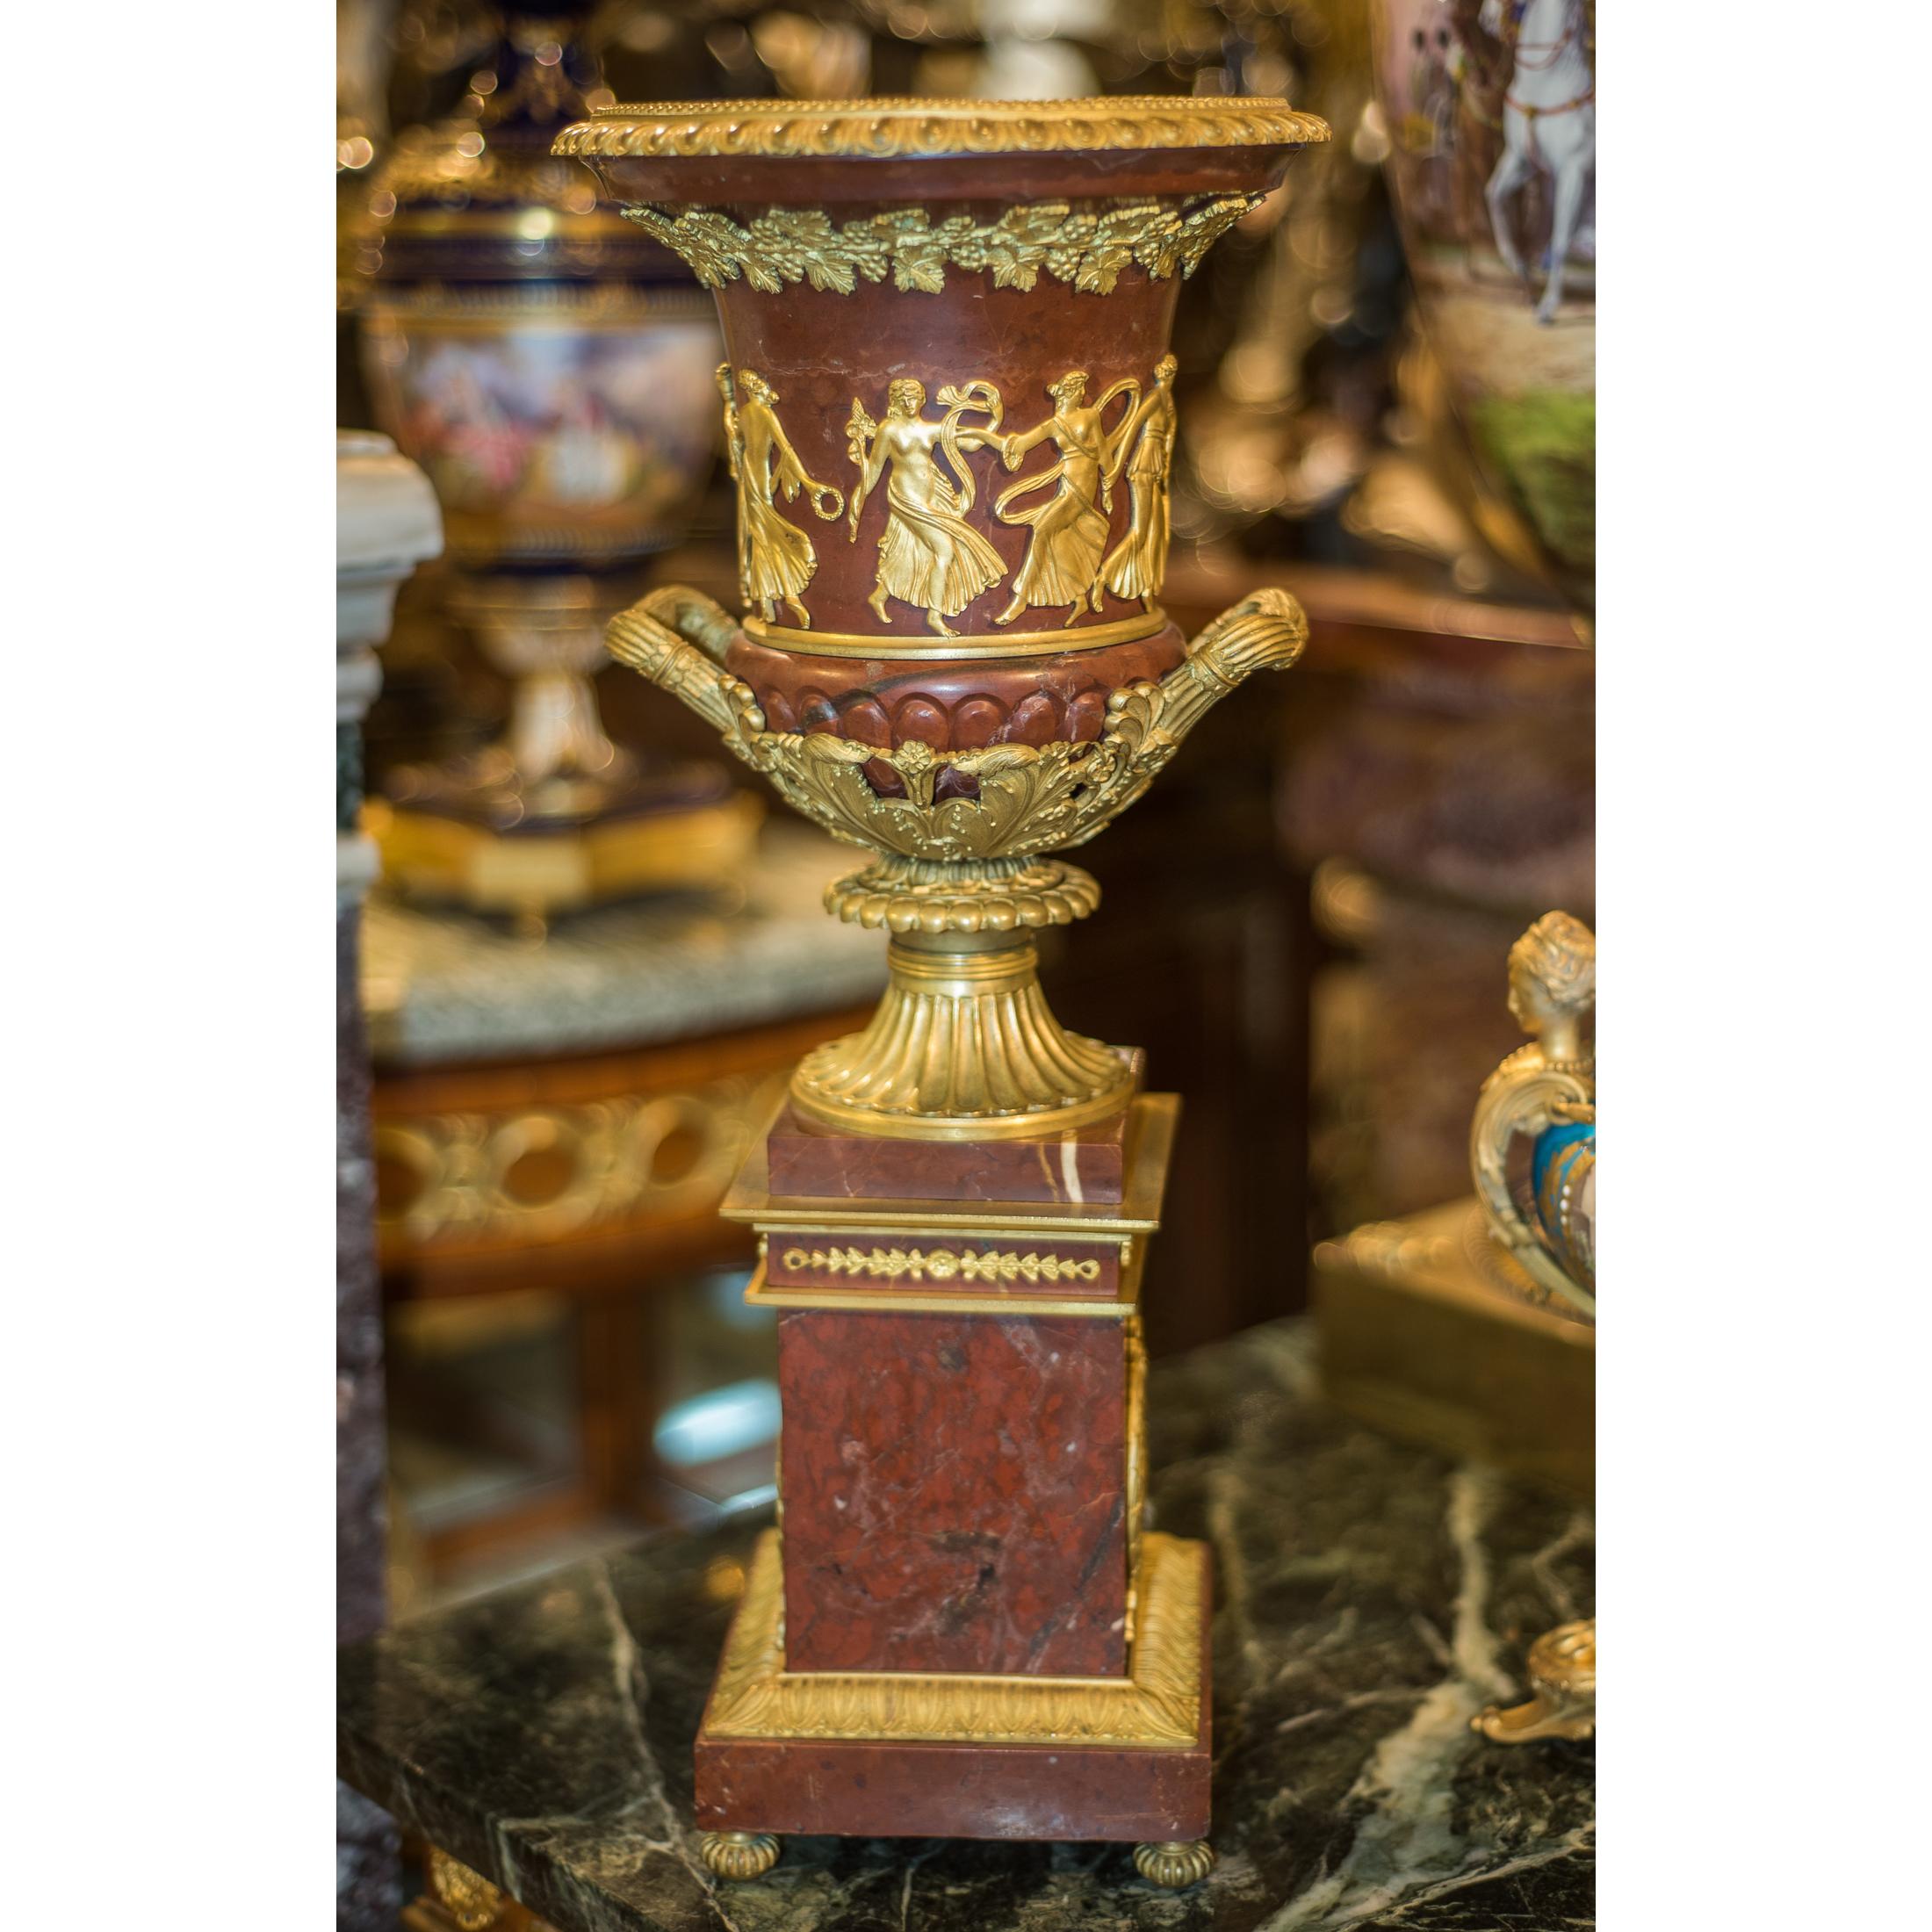 A fine quality pair of ormolu-mounted rouge marble urns featuring neoclassical dancers. A fine pair of French Regency gilt bronze mounted rouge marble urns featuring a neoclassical frieze of dancers on the surface with a column base bodice adorned